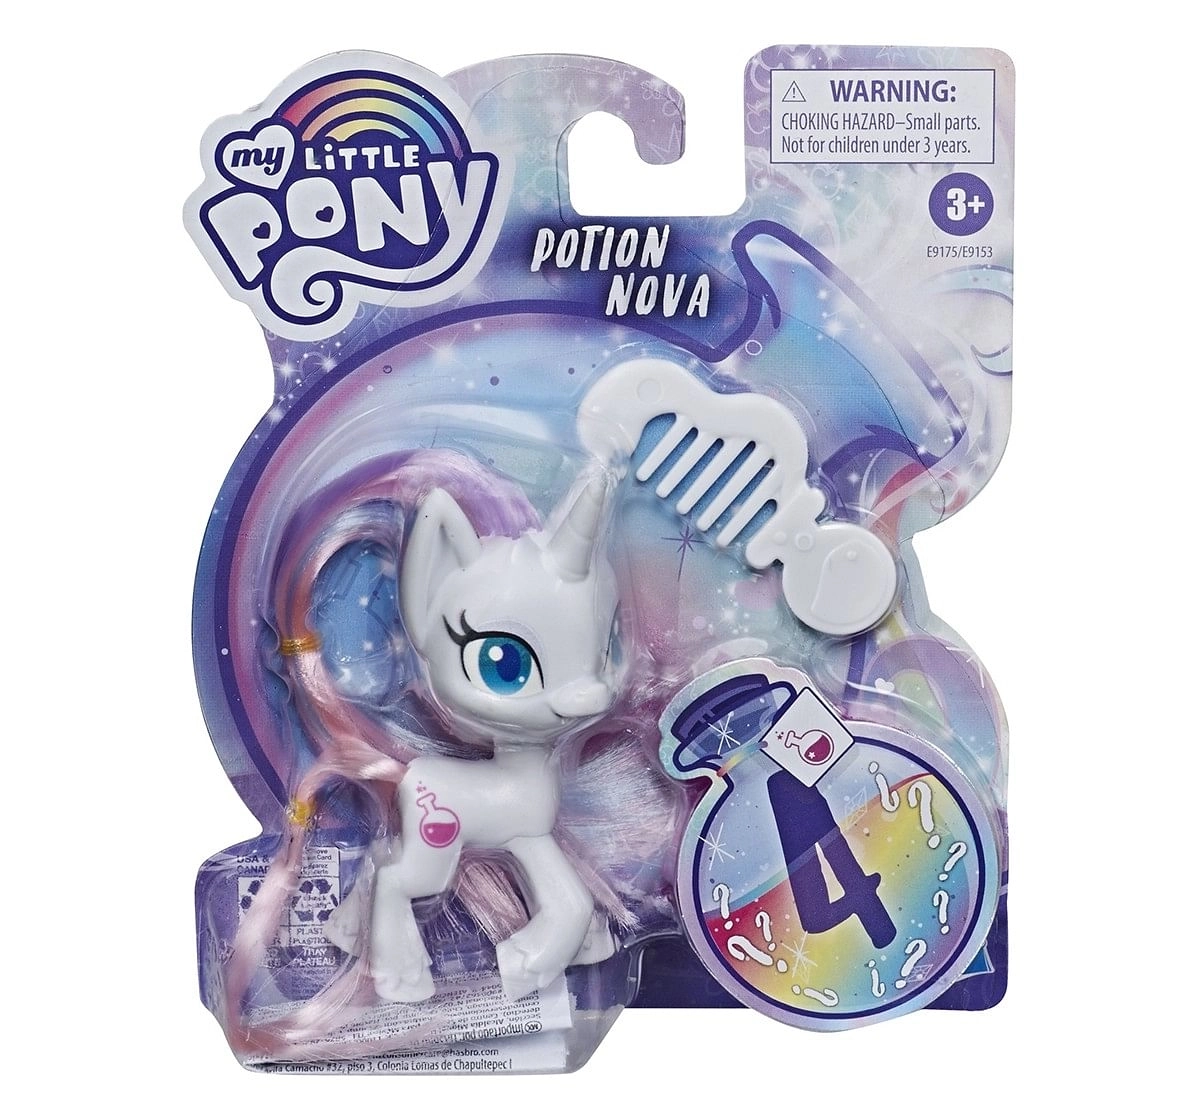 My Little Pony Applejack Potion Pony Figure-3-Inch Orange Pony Toy with Brushable Hair, Comb, and 4 Surprise Accessories for age 3Y+